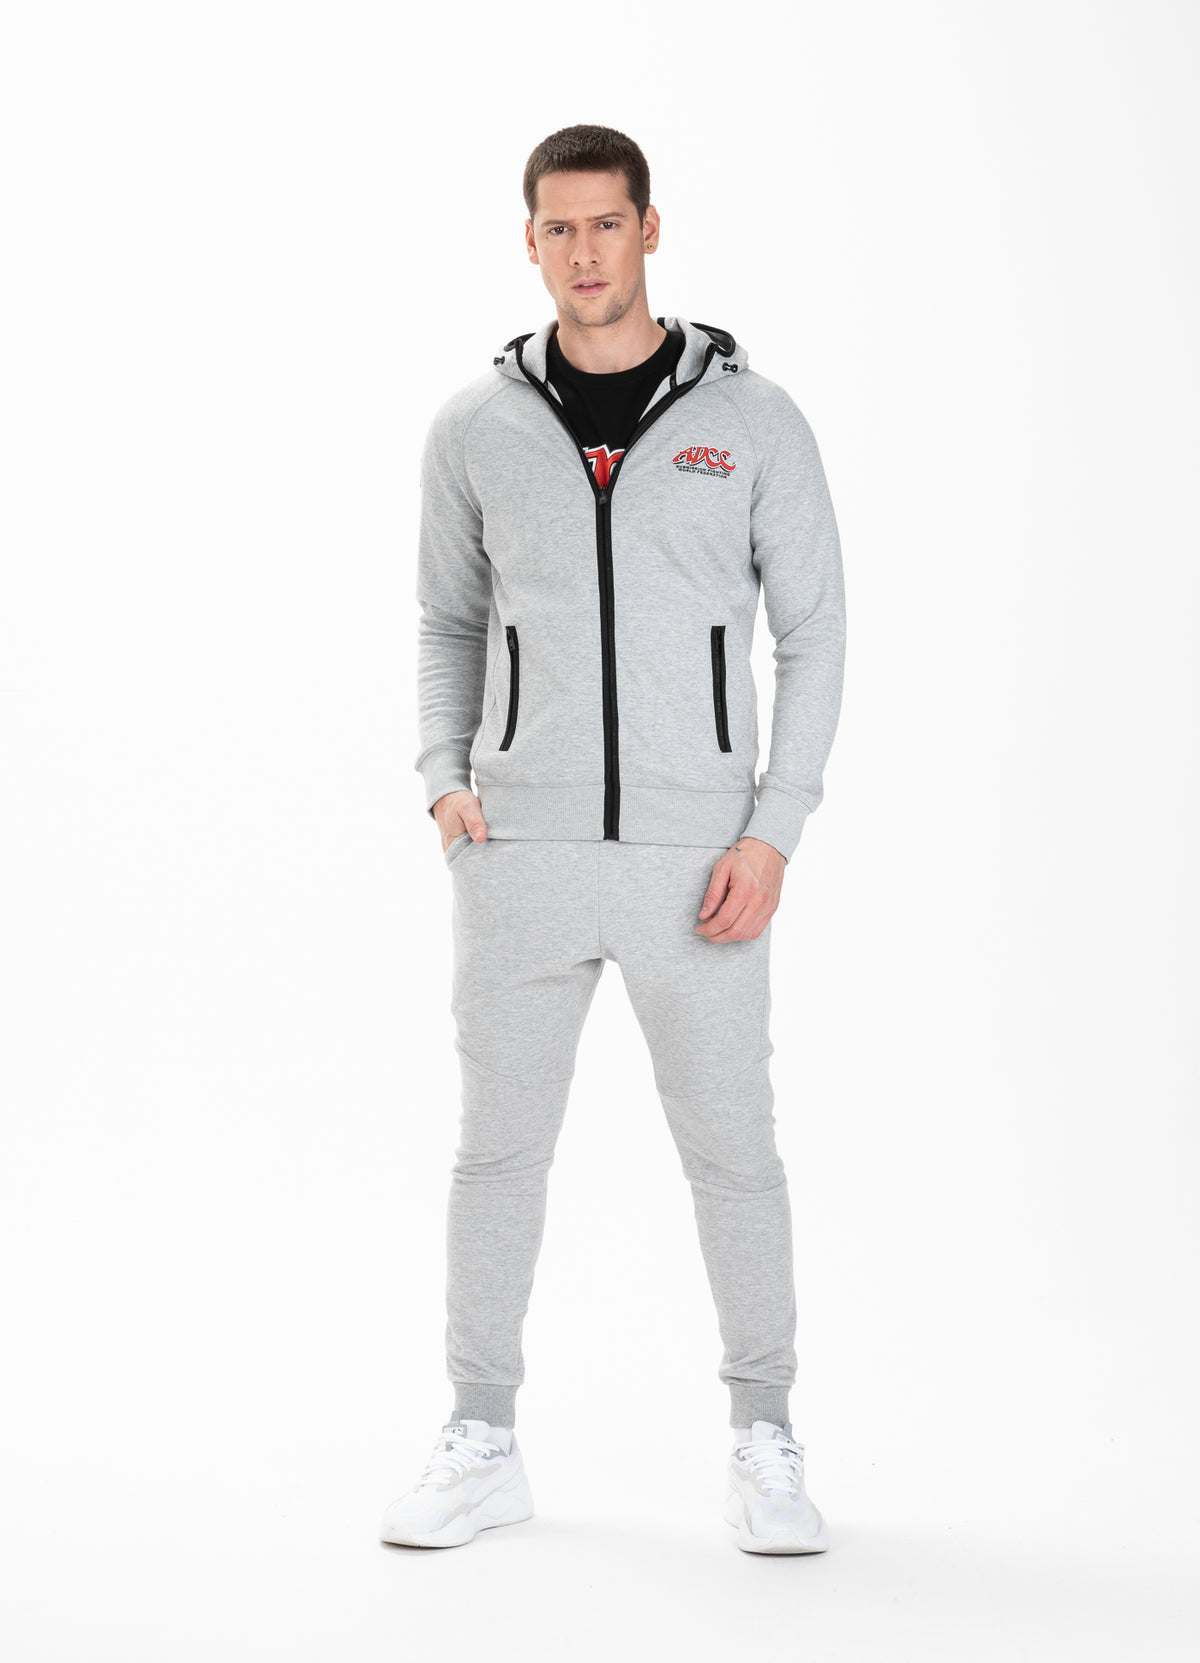 ADCC Grey Hooded Zip.